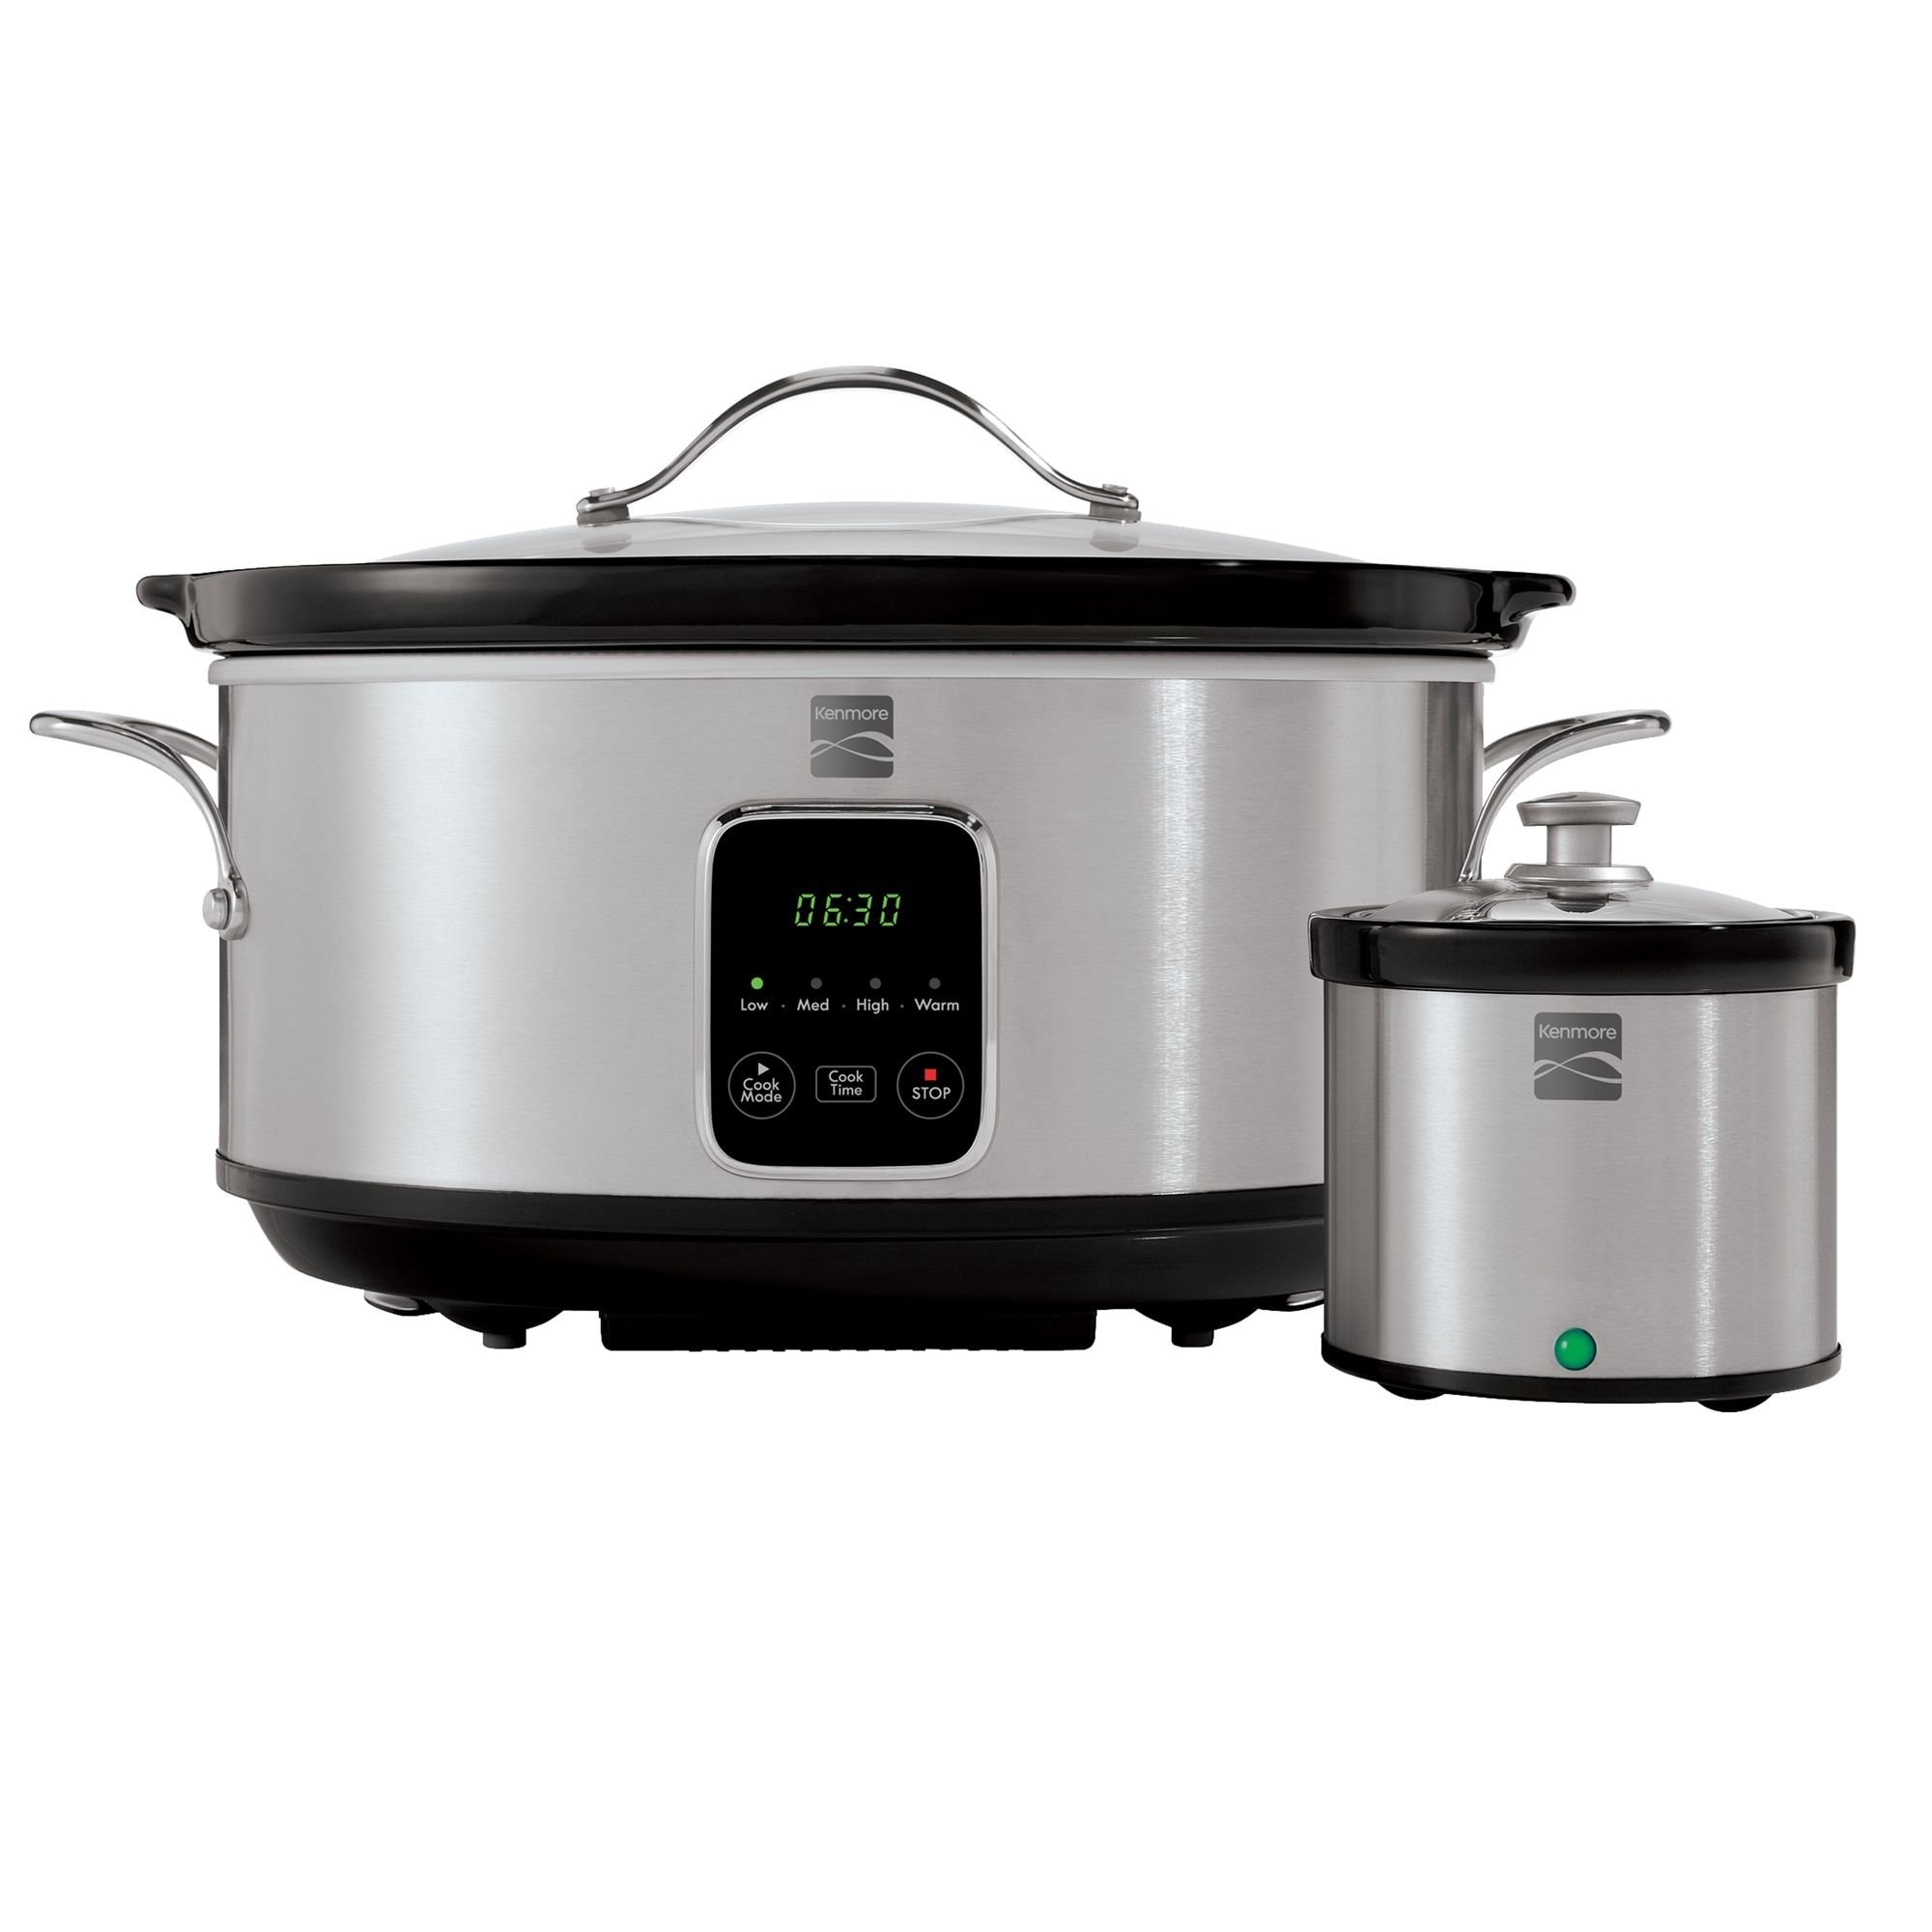 https://ak1.ostkcdn.com/images/products/is/images/direct/0cafdedf8b6336471737e34767244d85d1cbf09c/7-Quart-Slow-Cooker-with-Dipper-in-Stainless-Steel.jpg